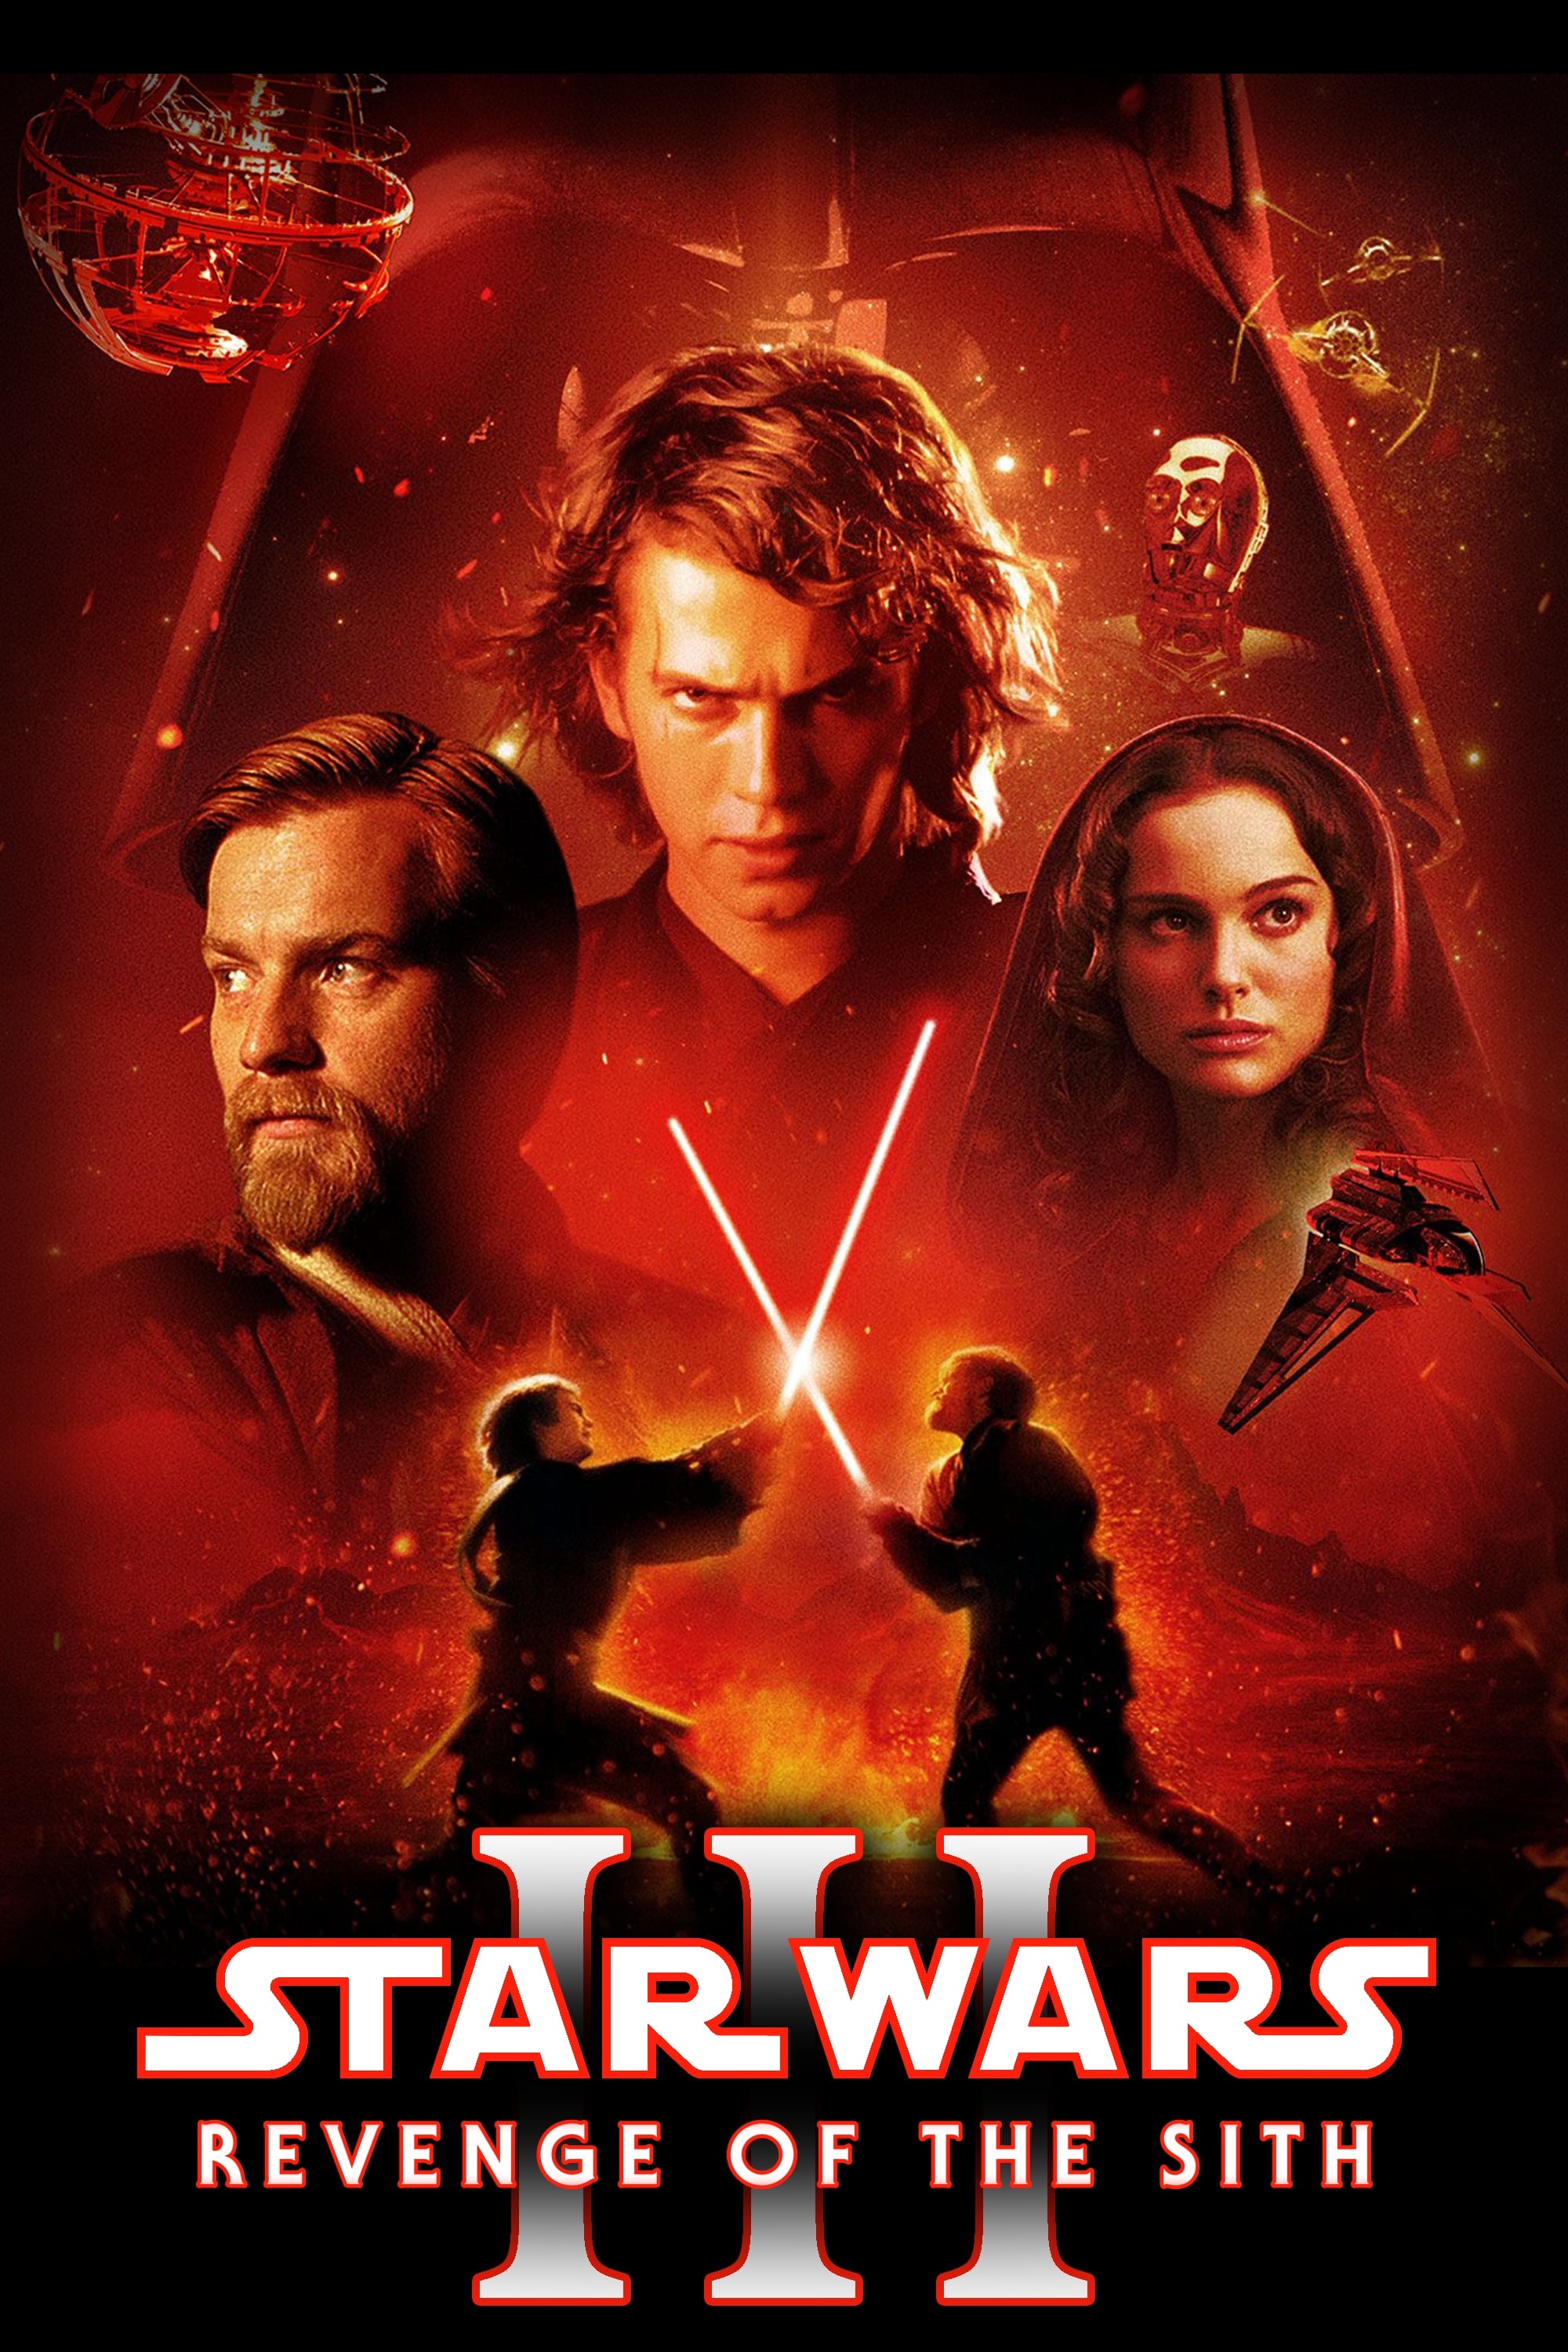 Star Wars Episode III Revenge Of The Sith (2005) REMUX 4K HDR Latino – CMHDD